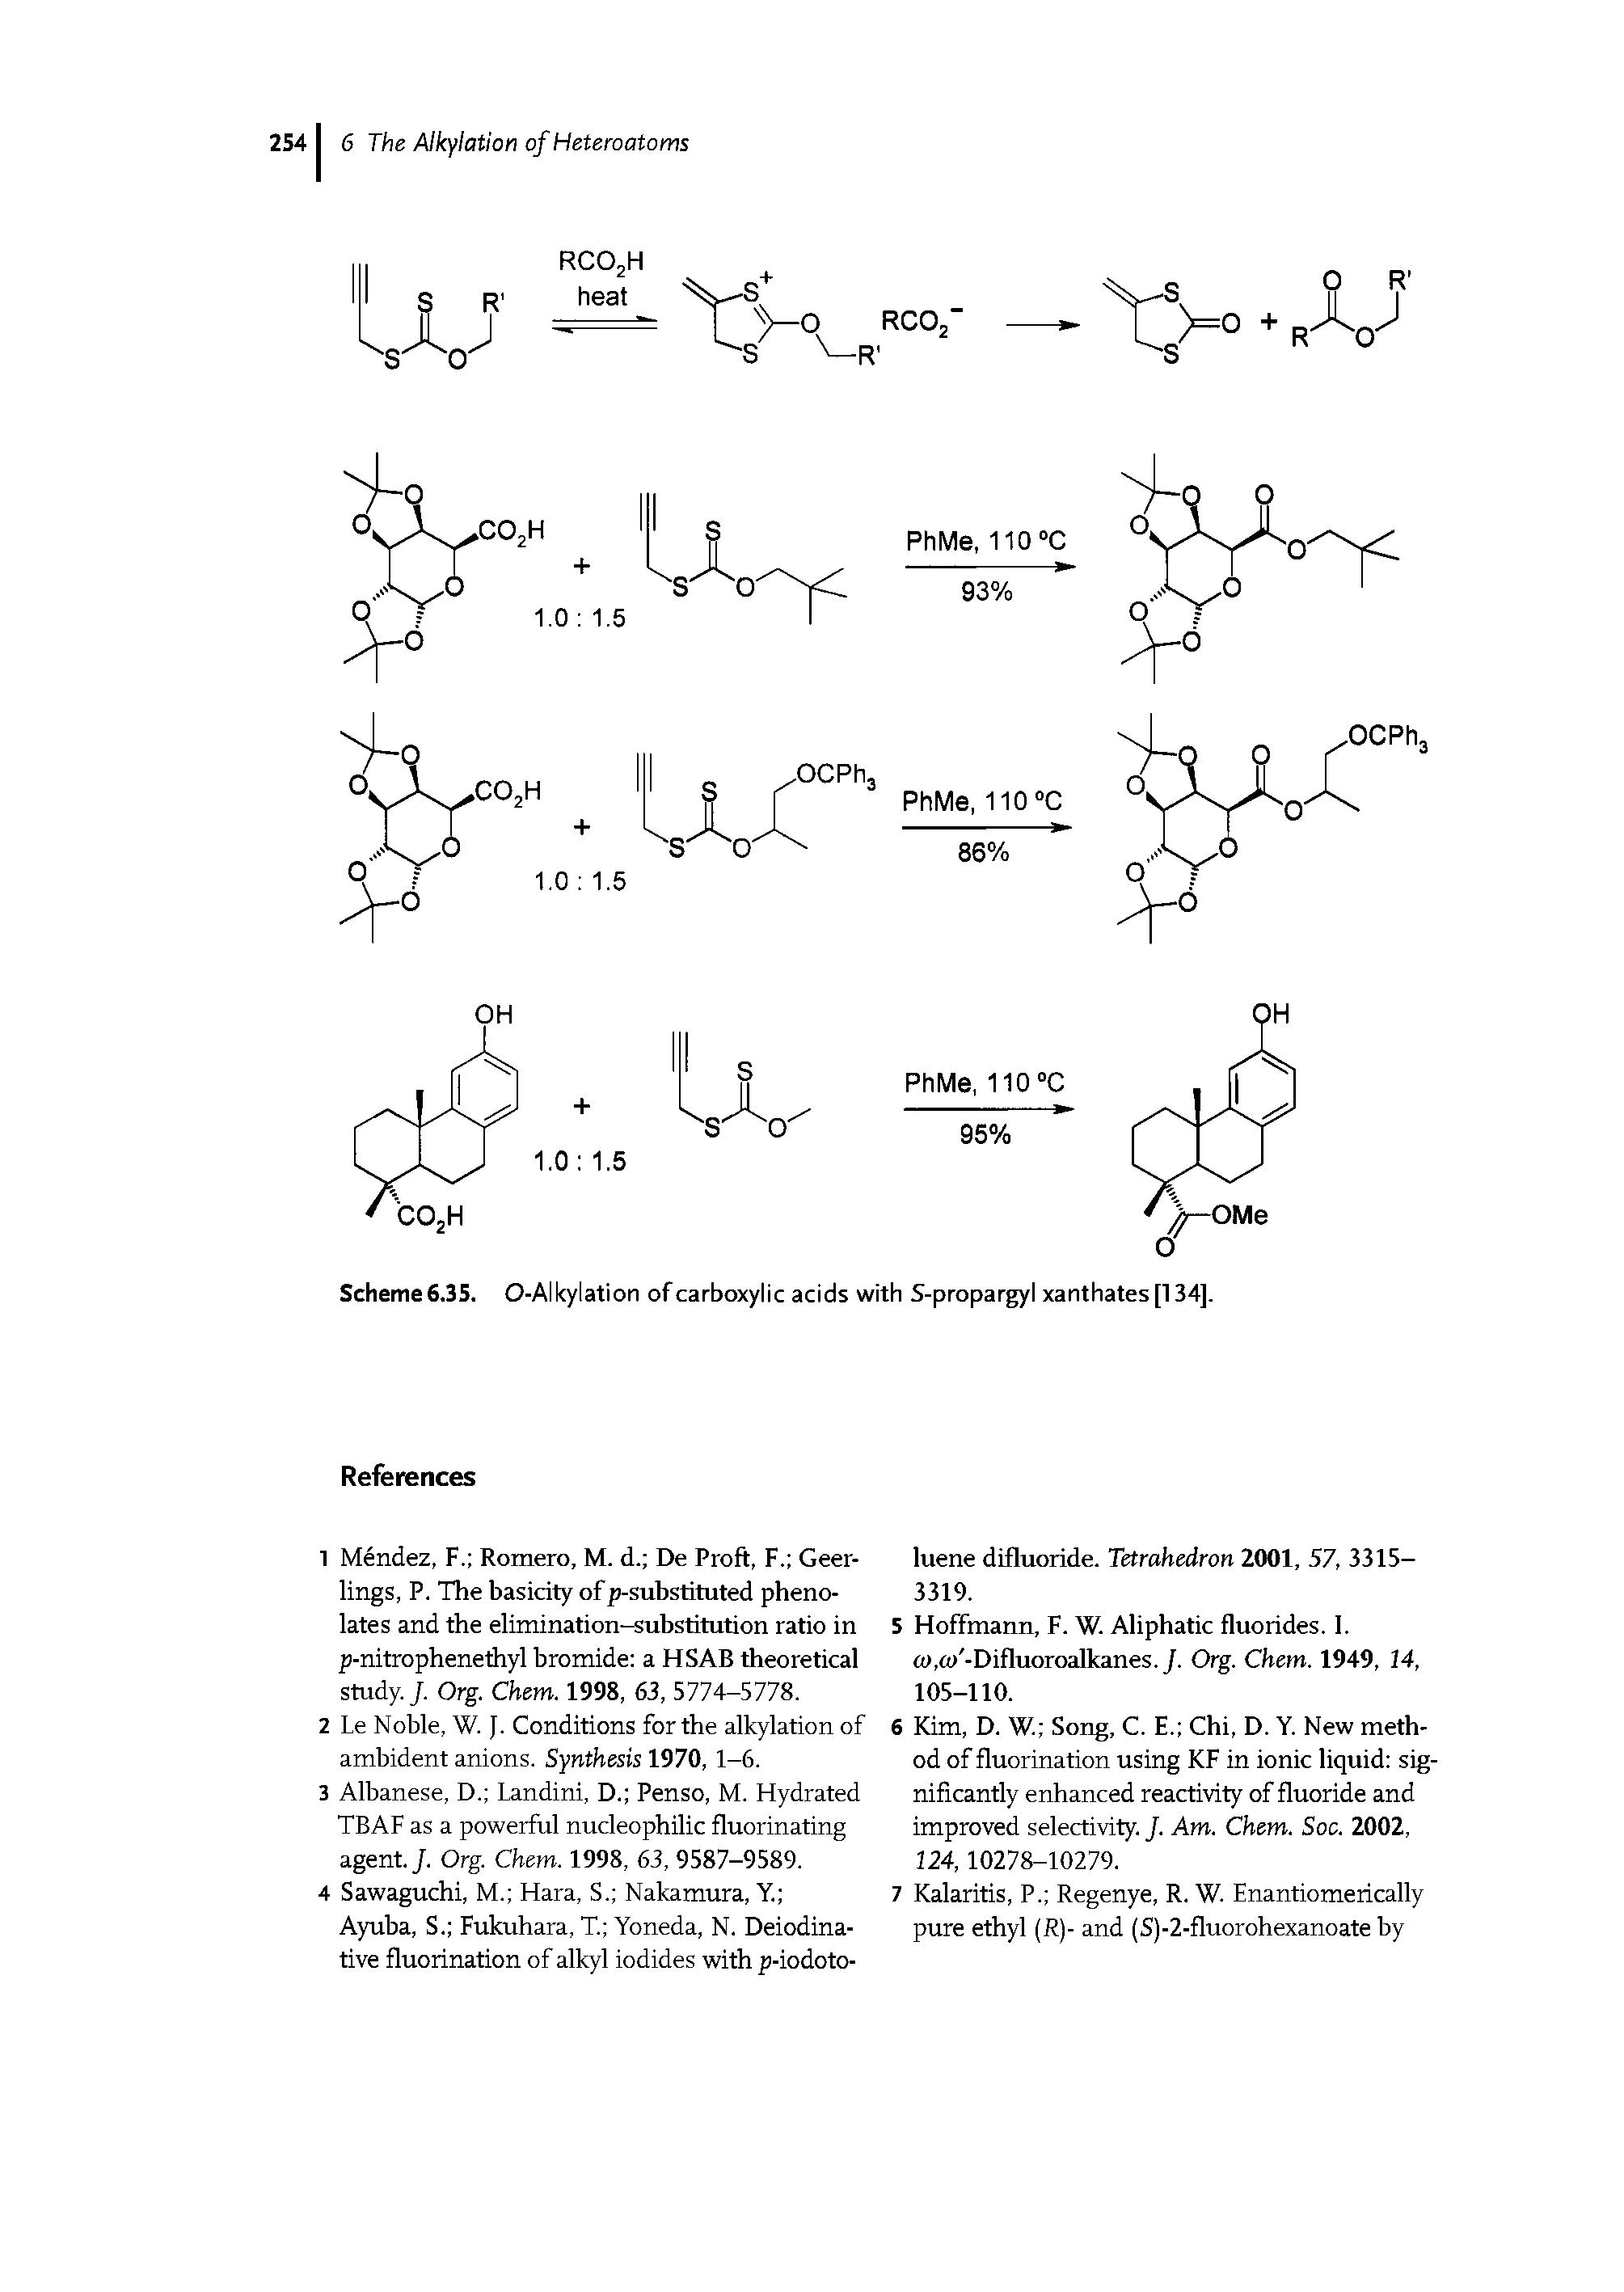 Scheme 6.35. O-Alkylation of carboxylic acids with S-propargyl xanthates [134],...